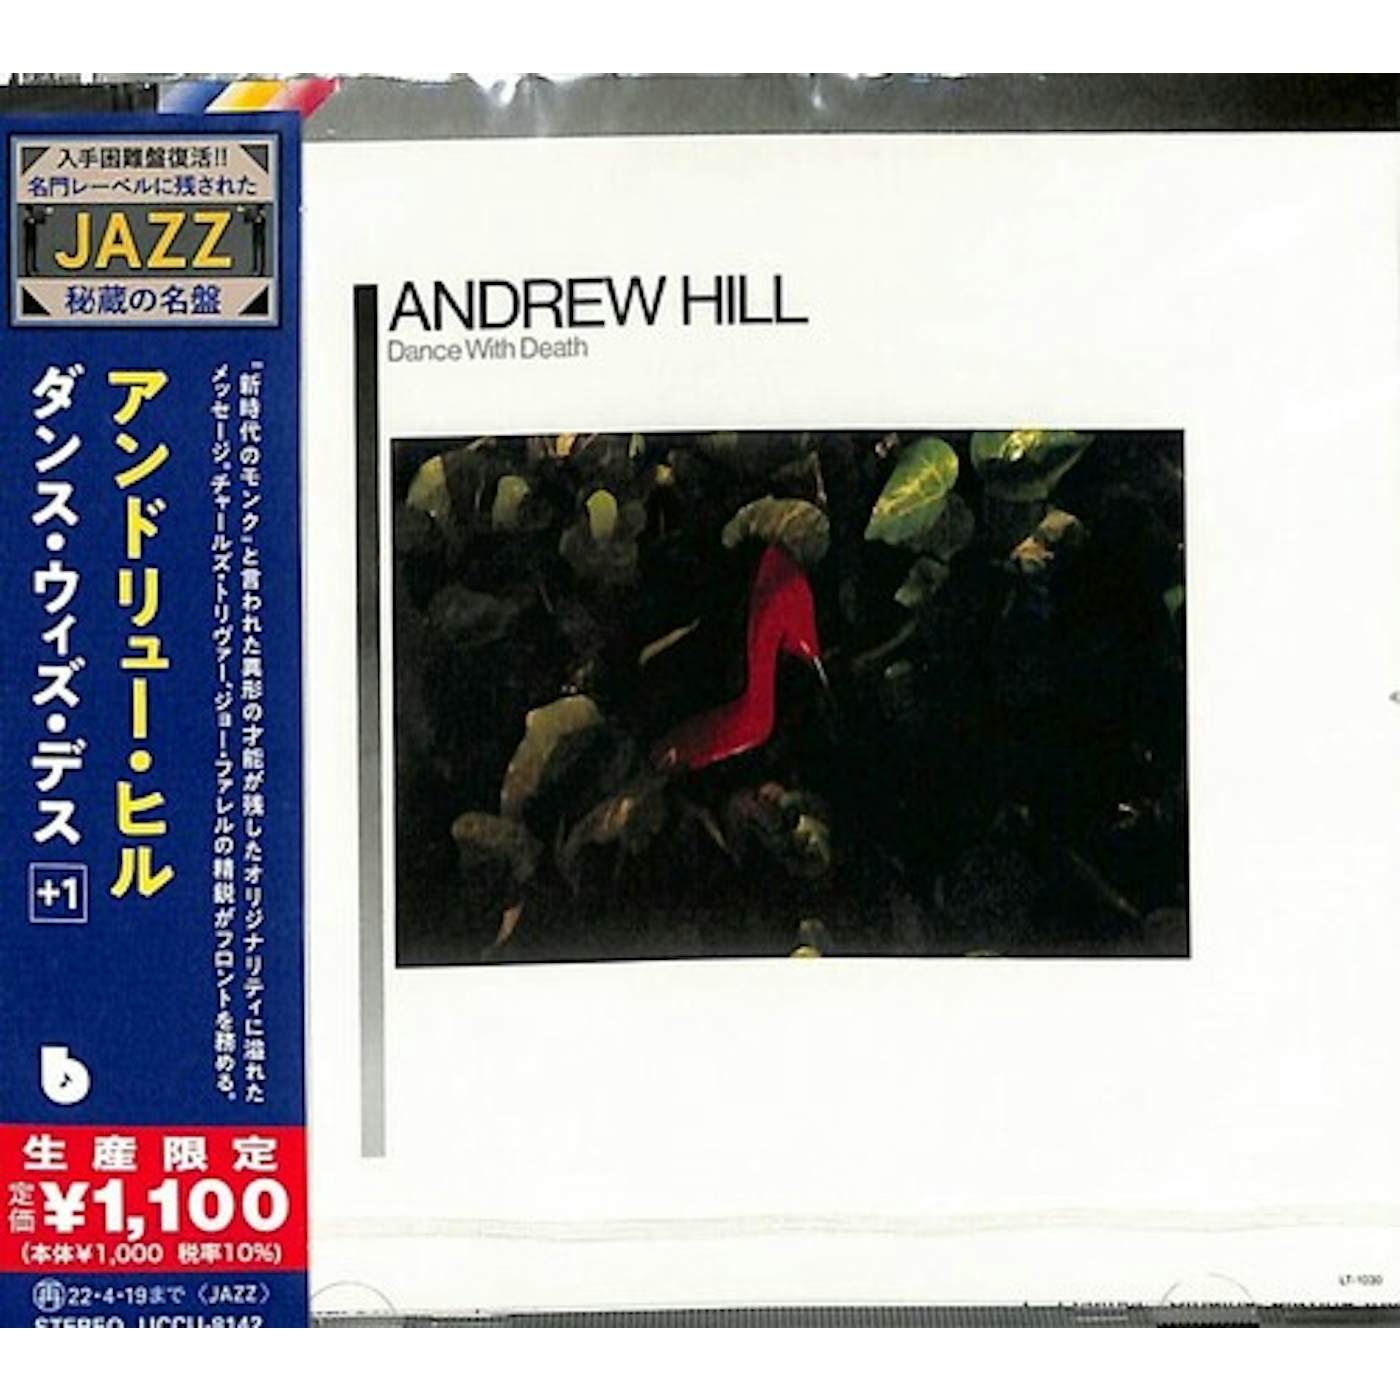 Andrew Hill DANCE WITH DEATH CD